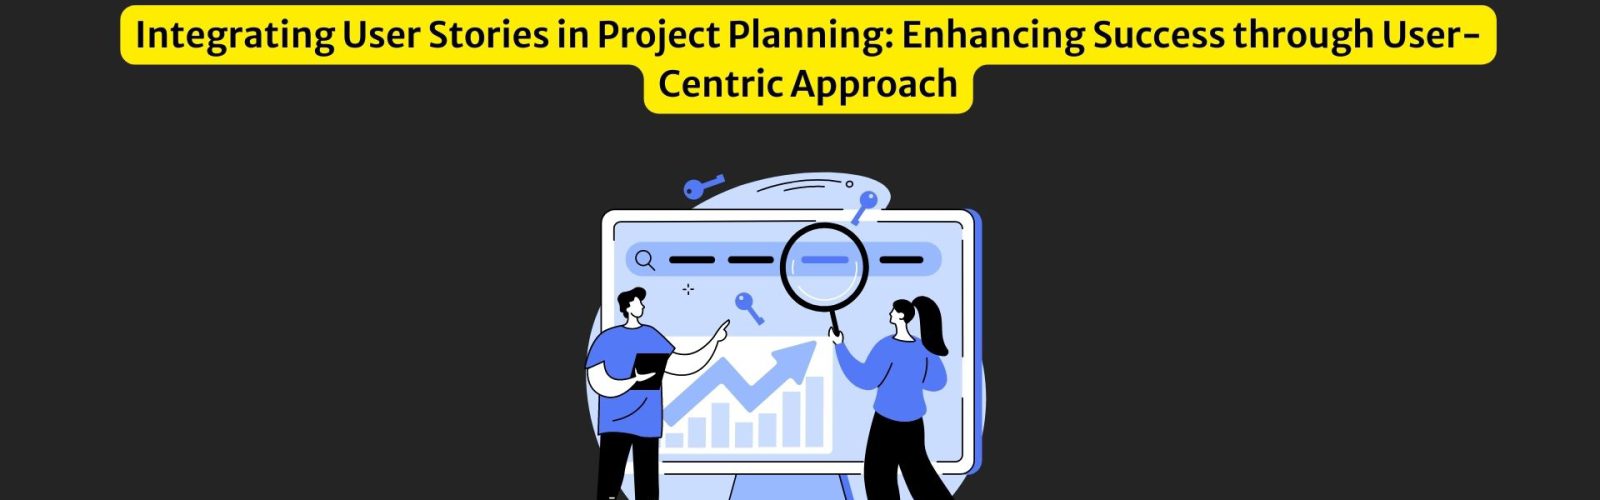 Integrating User Stories in Project Planning Enhancing Success through User-Centric Approach